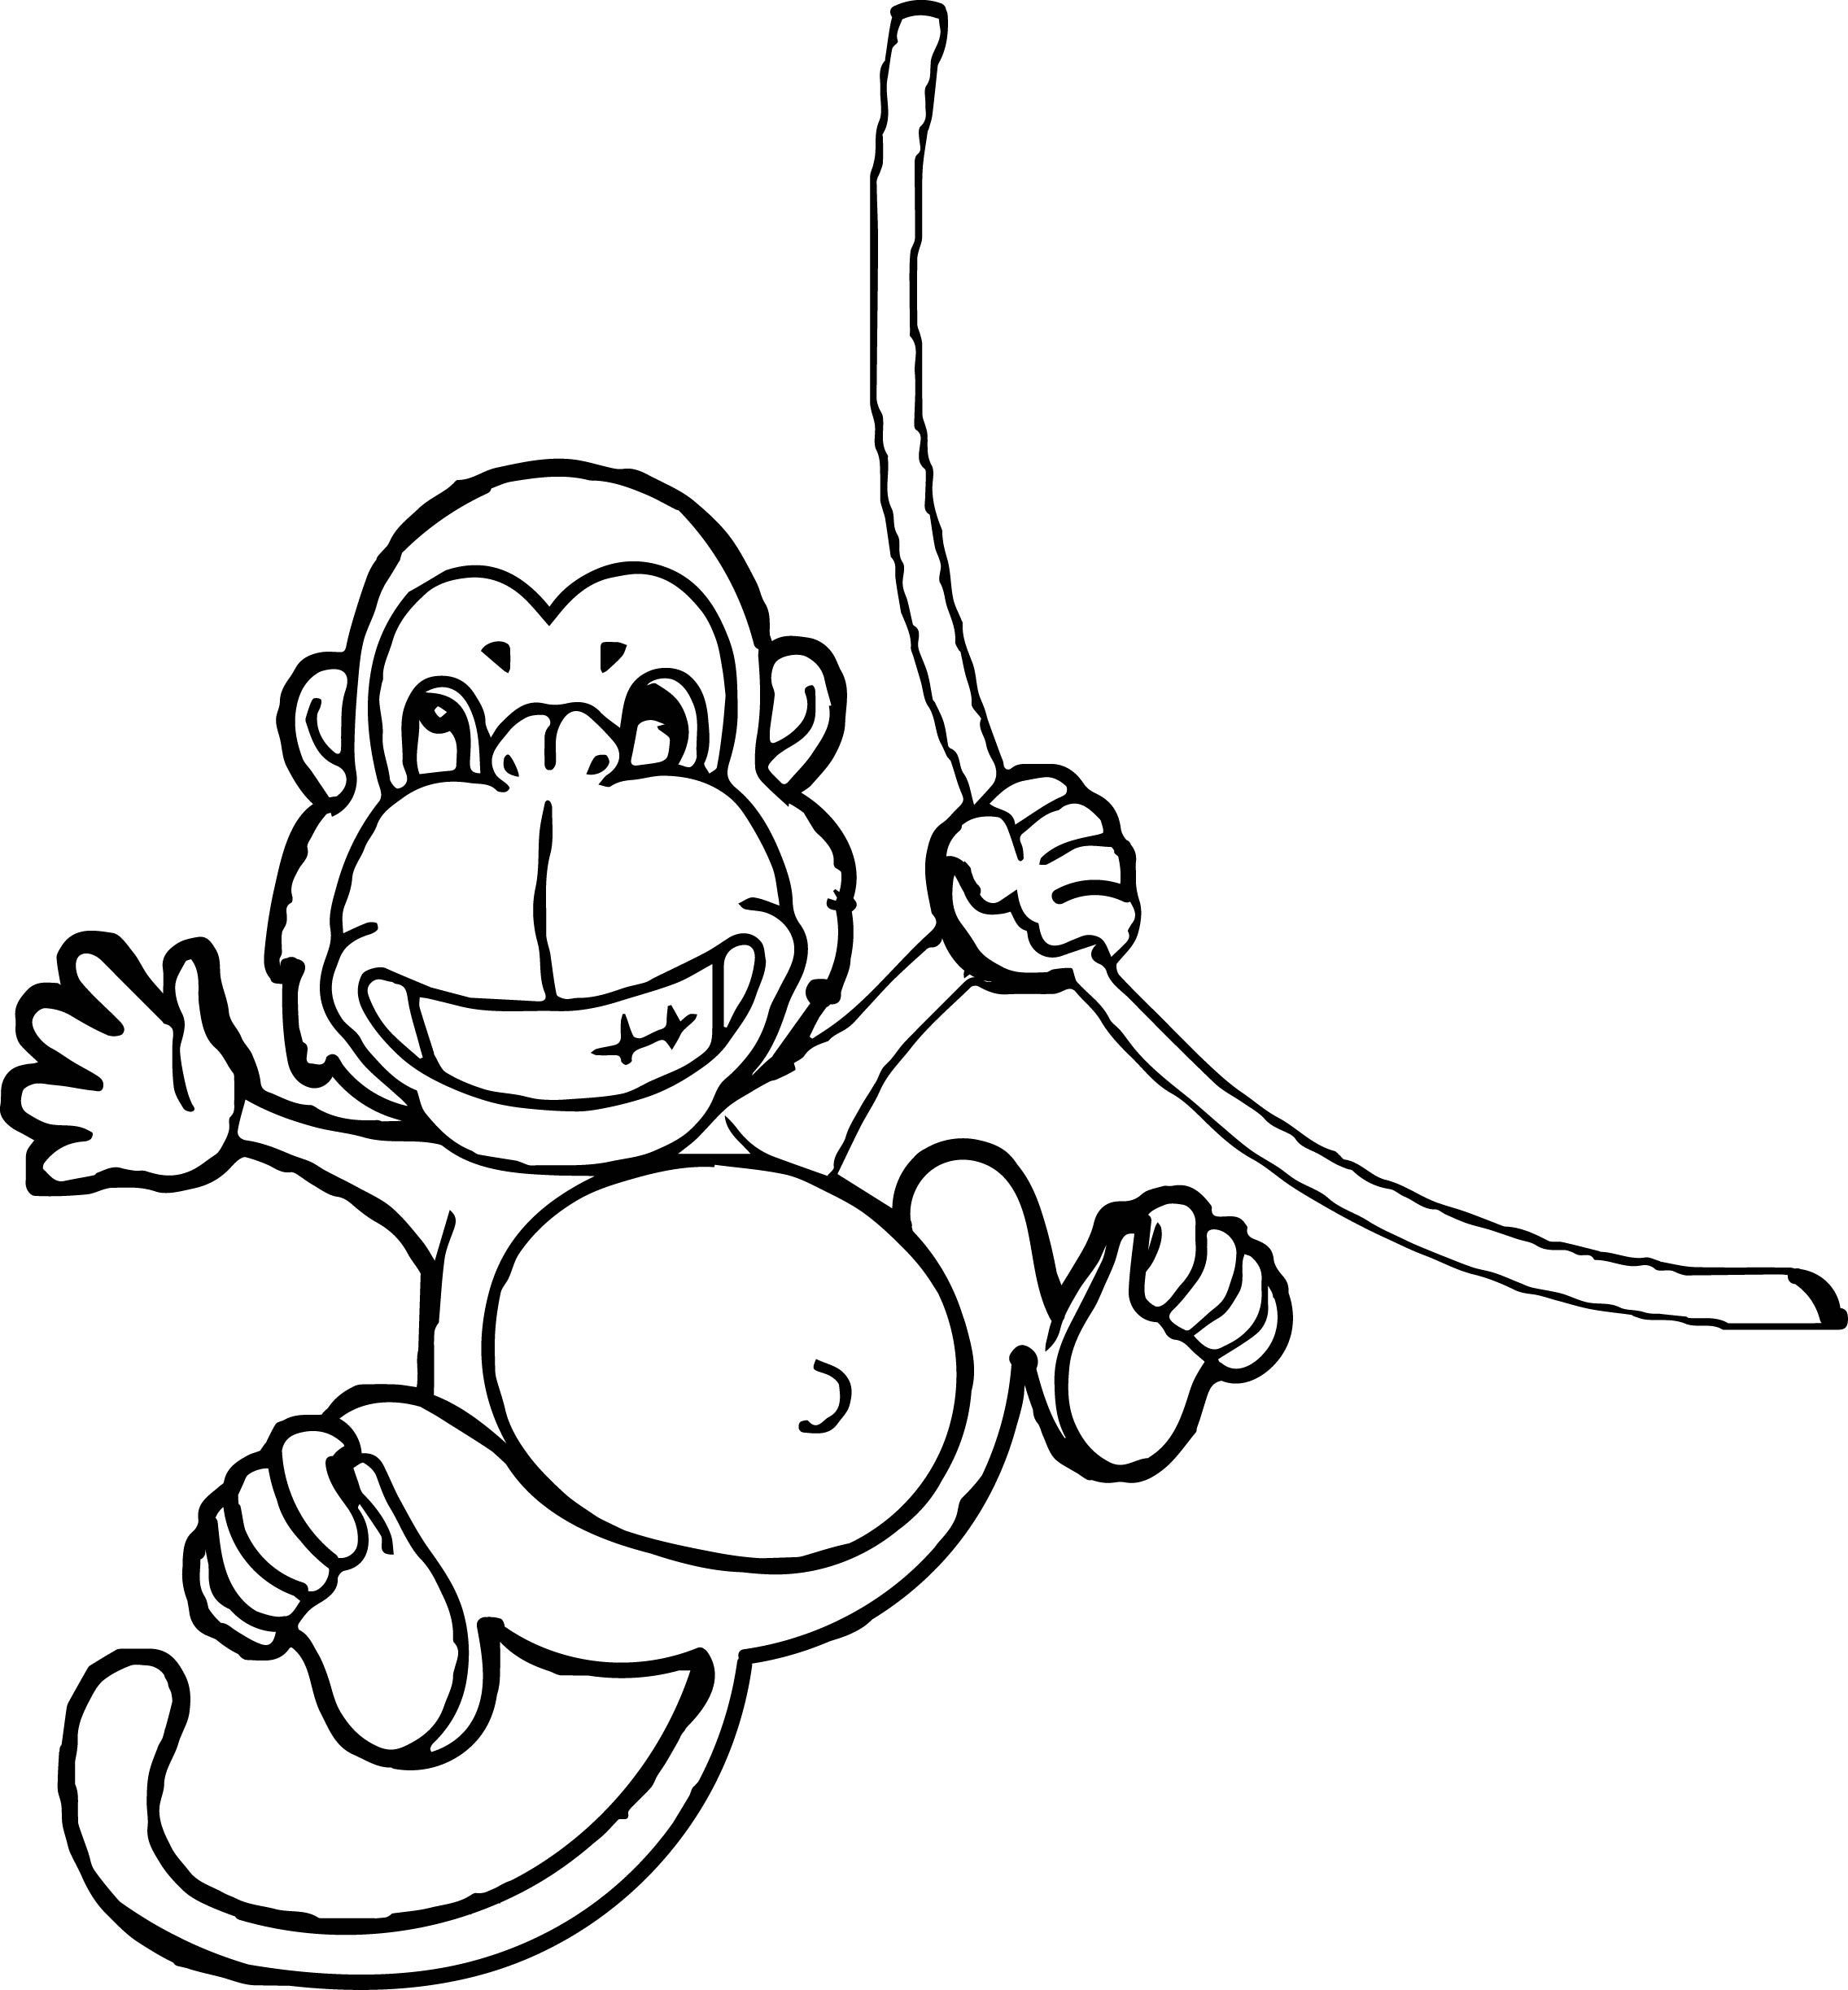 Sock Monkey Coloring Page Zoo Tropical Happy Monkey Coloring Page Wecoloringpage